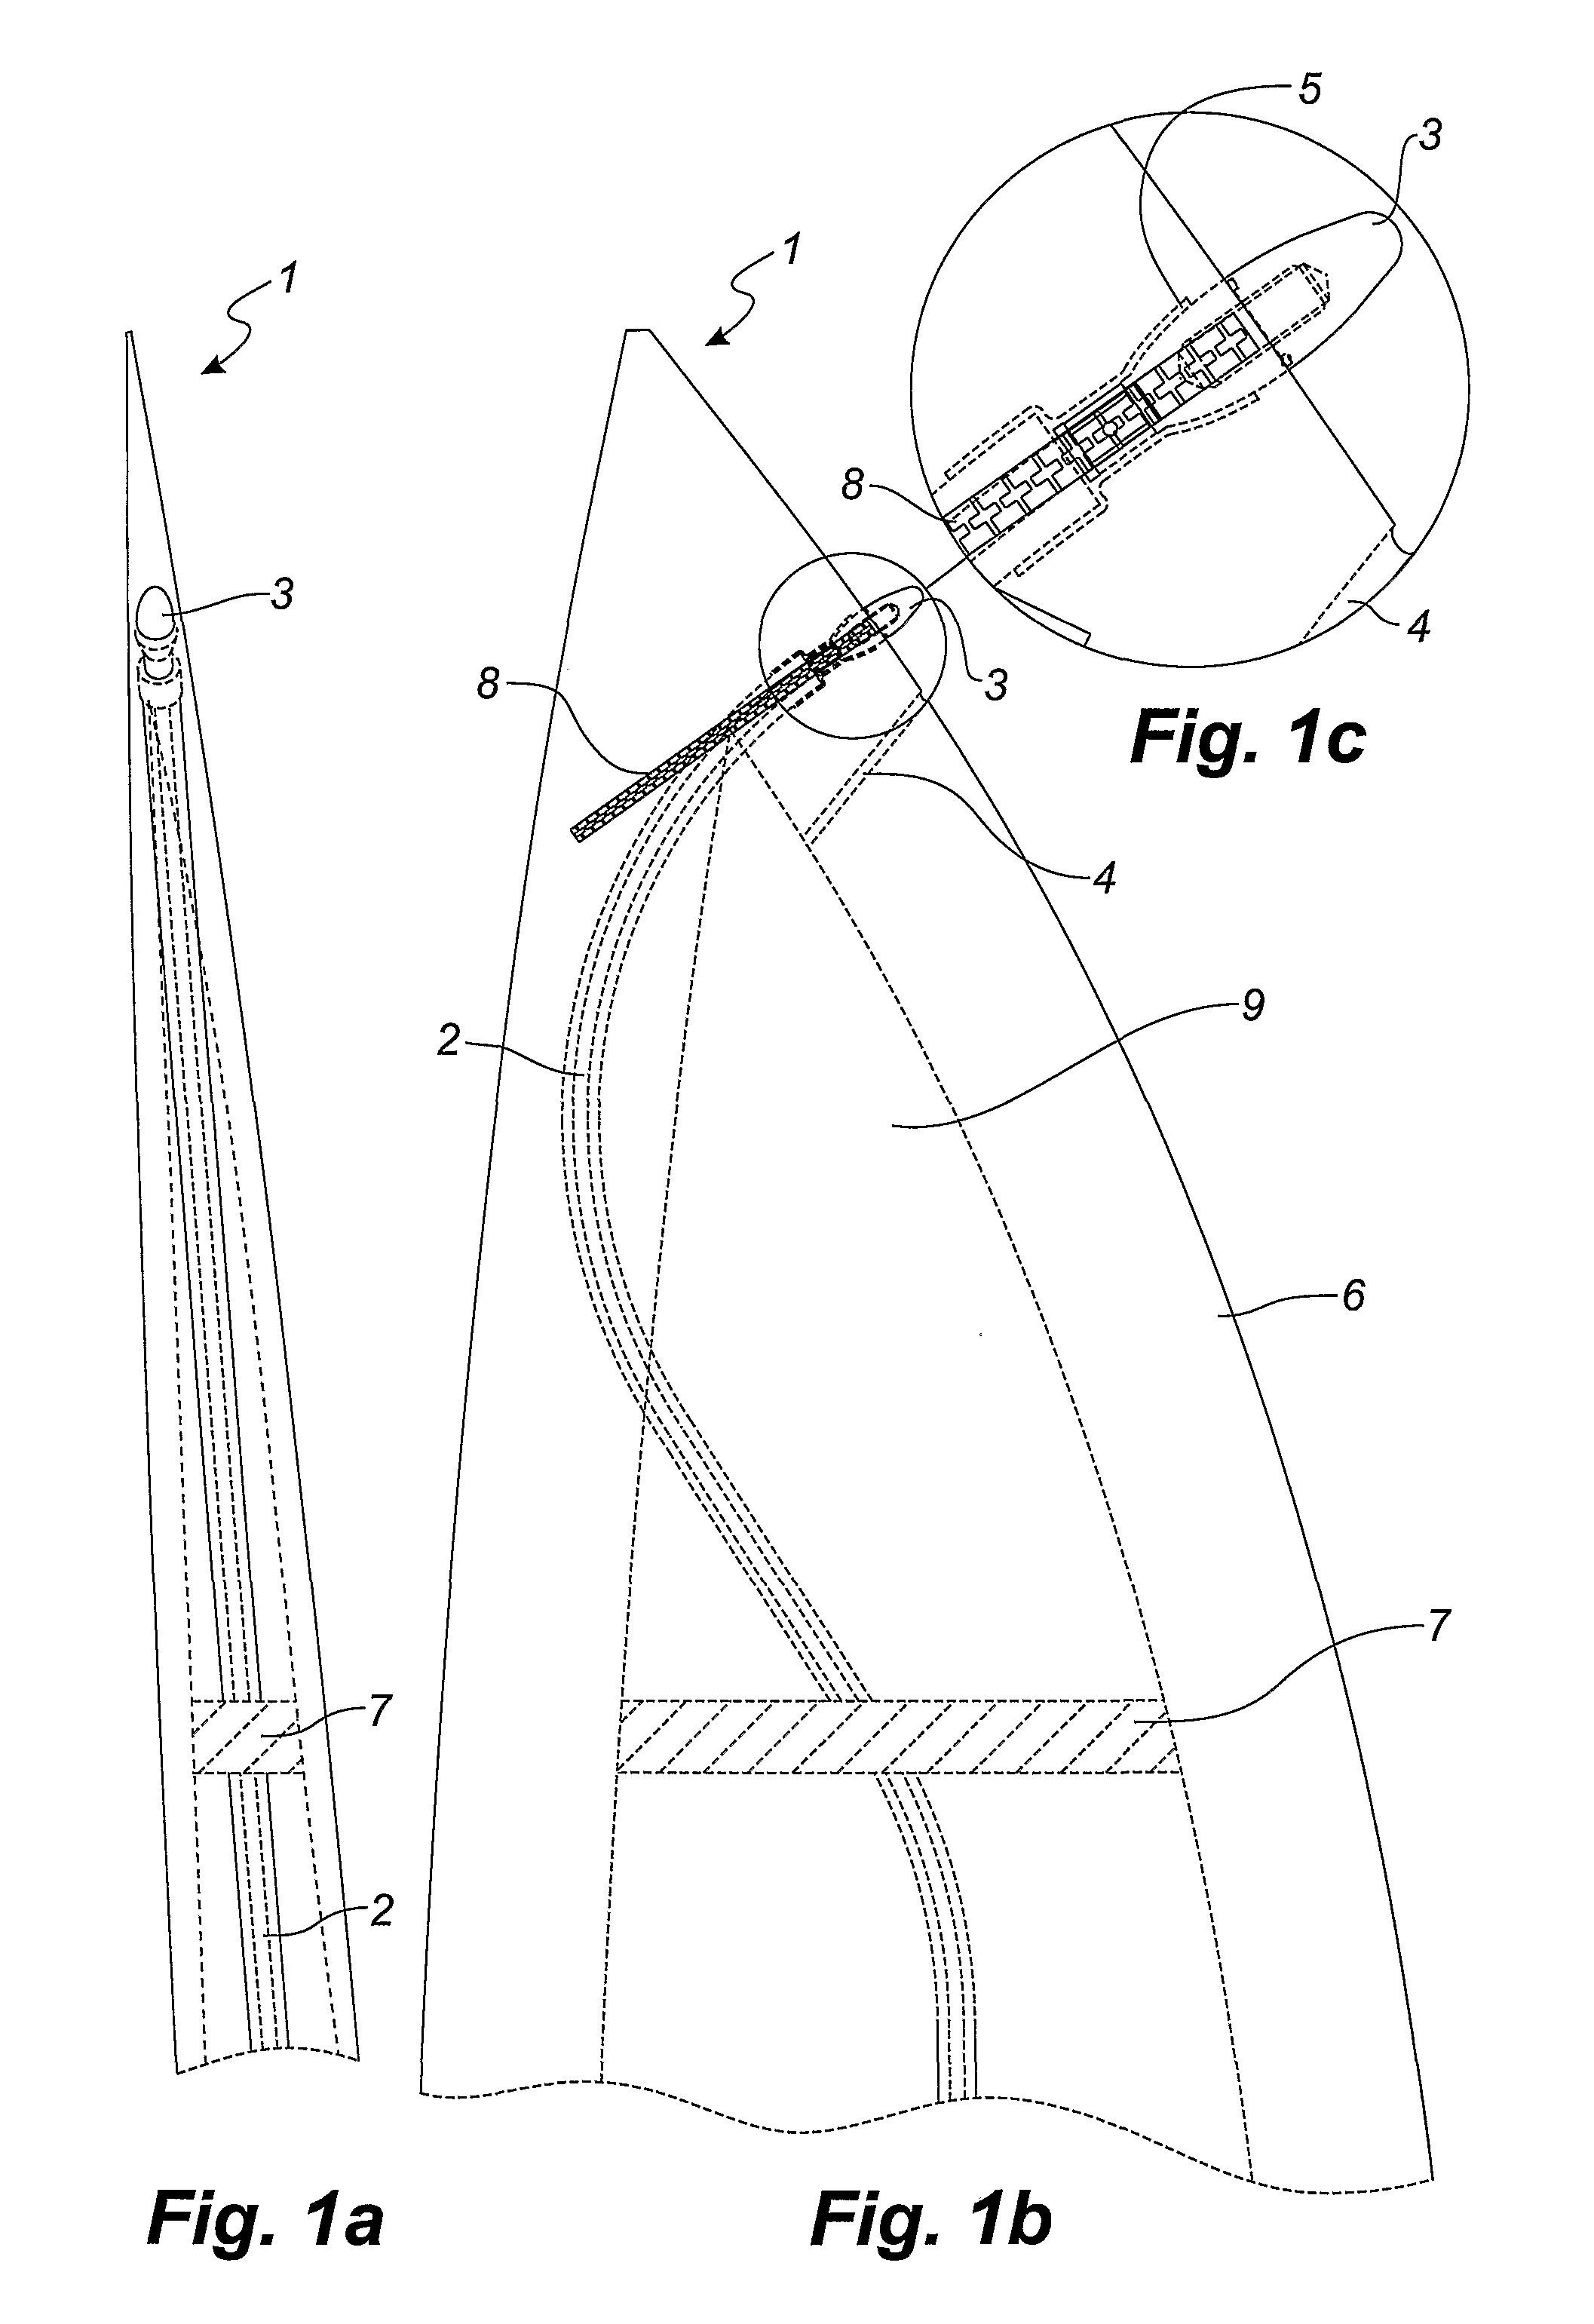 Lightning Protection System for a Wind Turbine Blade